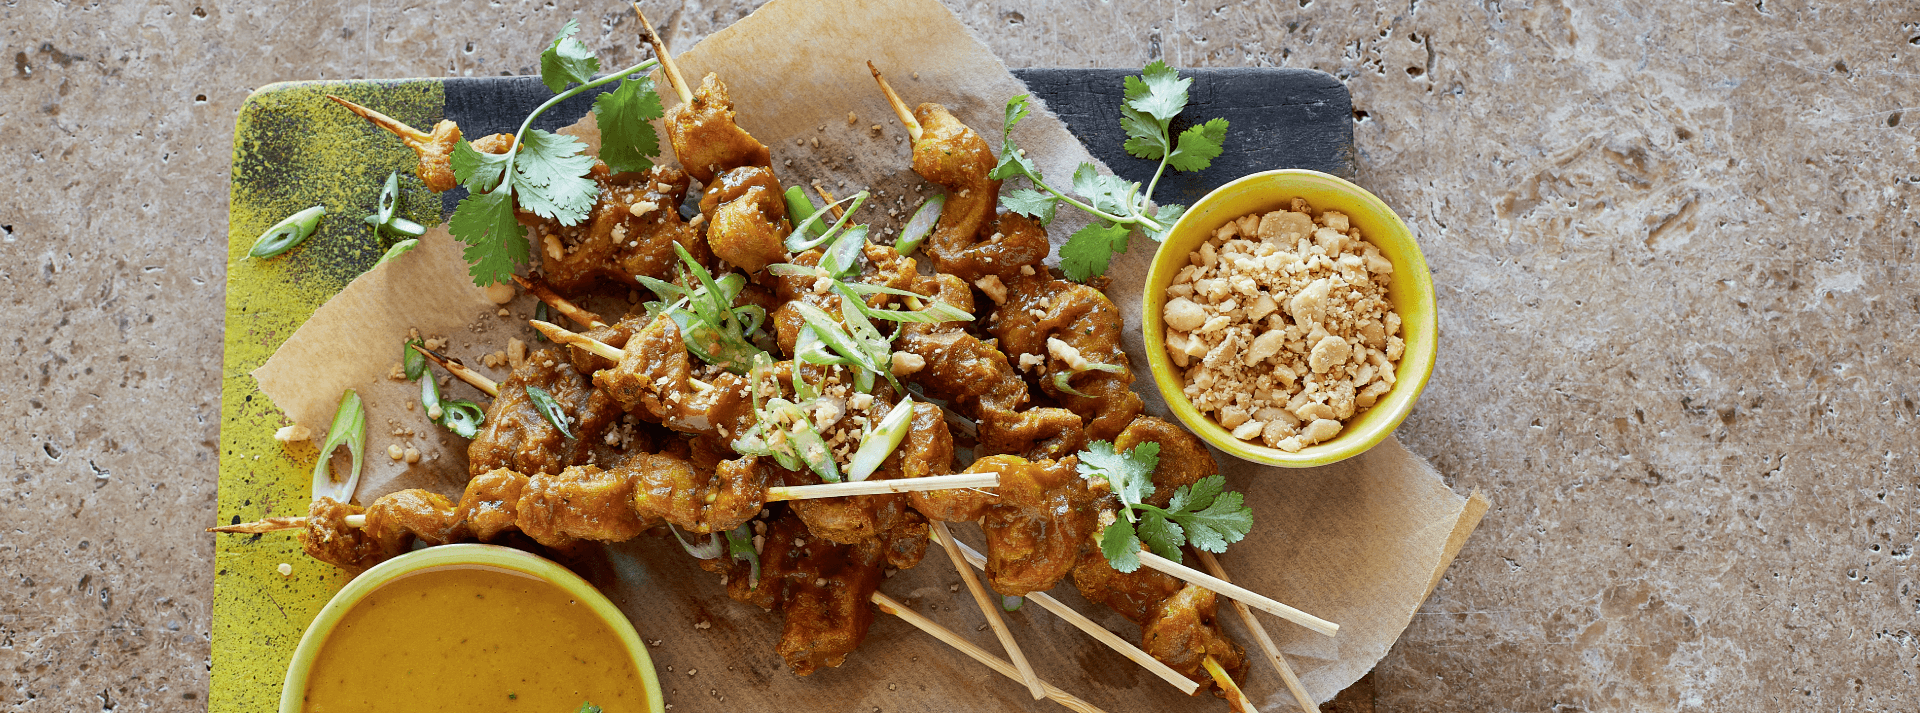 Chicken-Style Skewers with Peanut Satay 2019